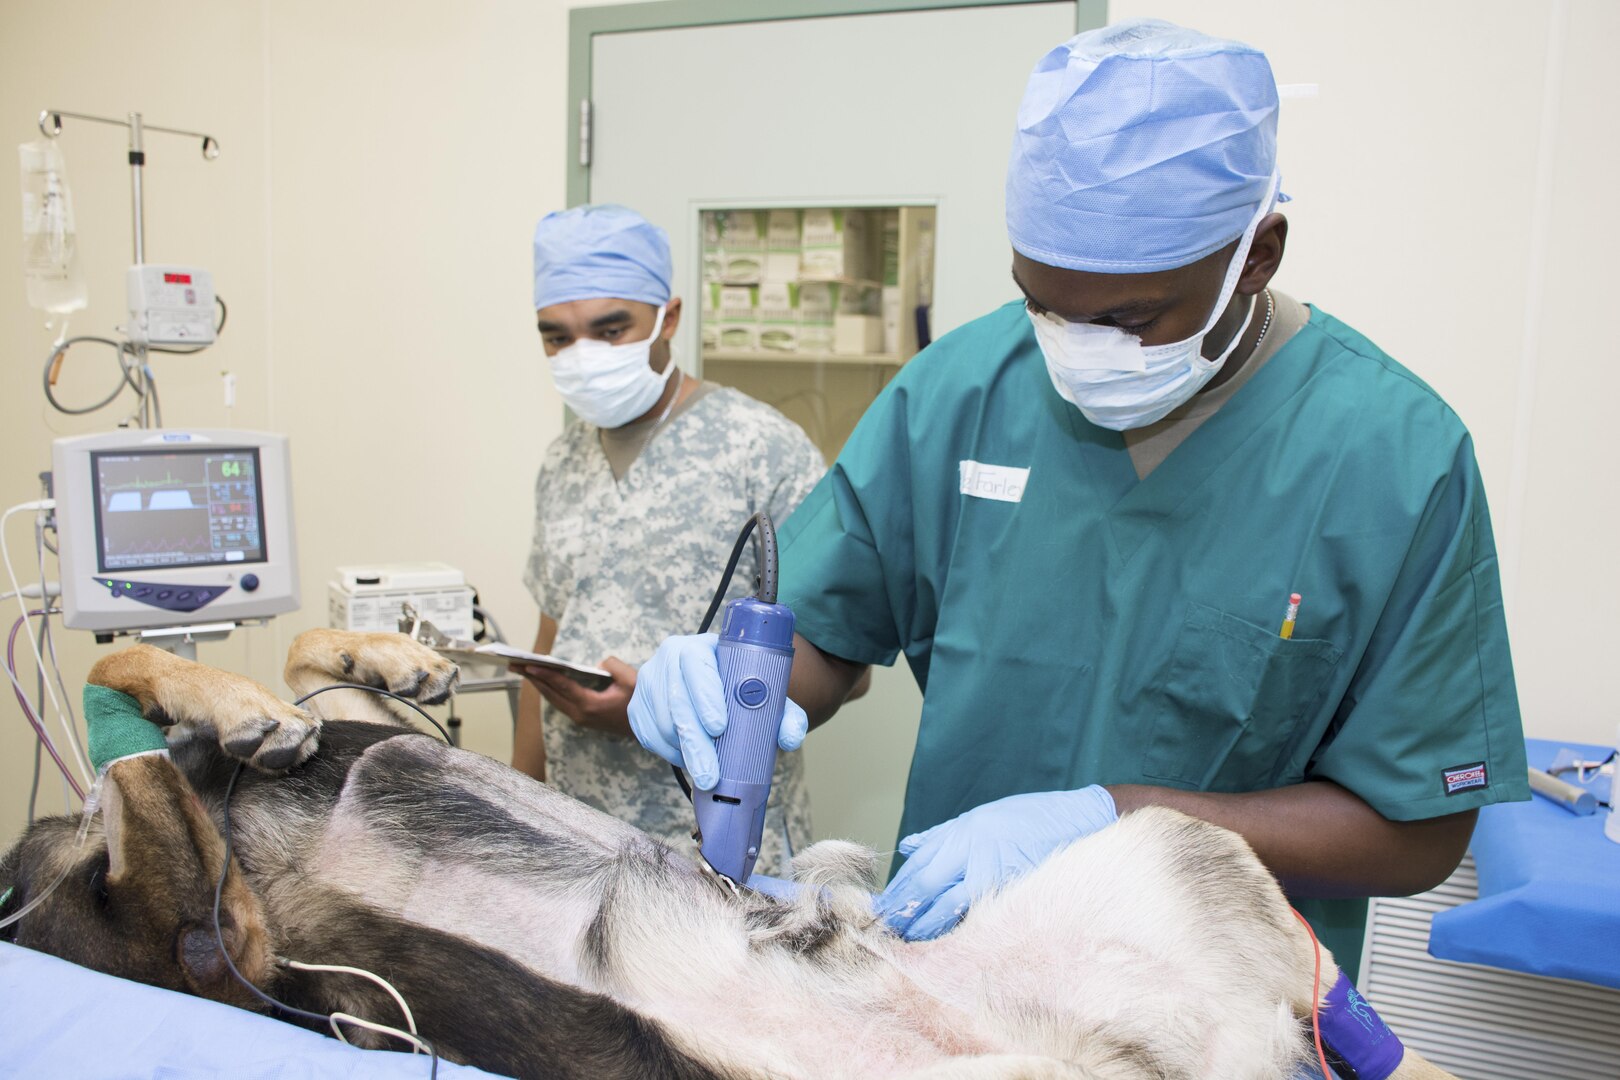 Pvt. Audie Farley (left) shaves a U.S. Customs and Border Patrol working dog in preparation for surgery while Pvt. Miles Gist monitors the animal’s vital signs.